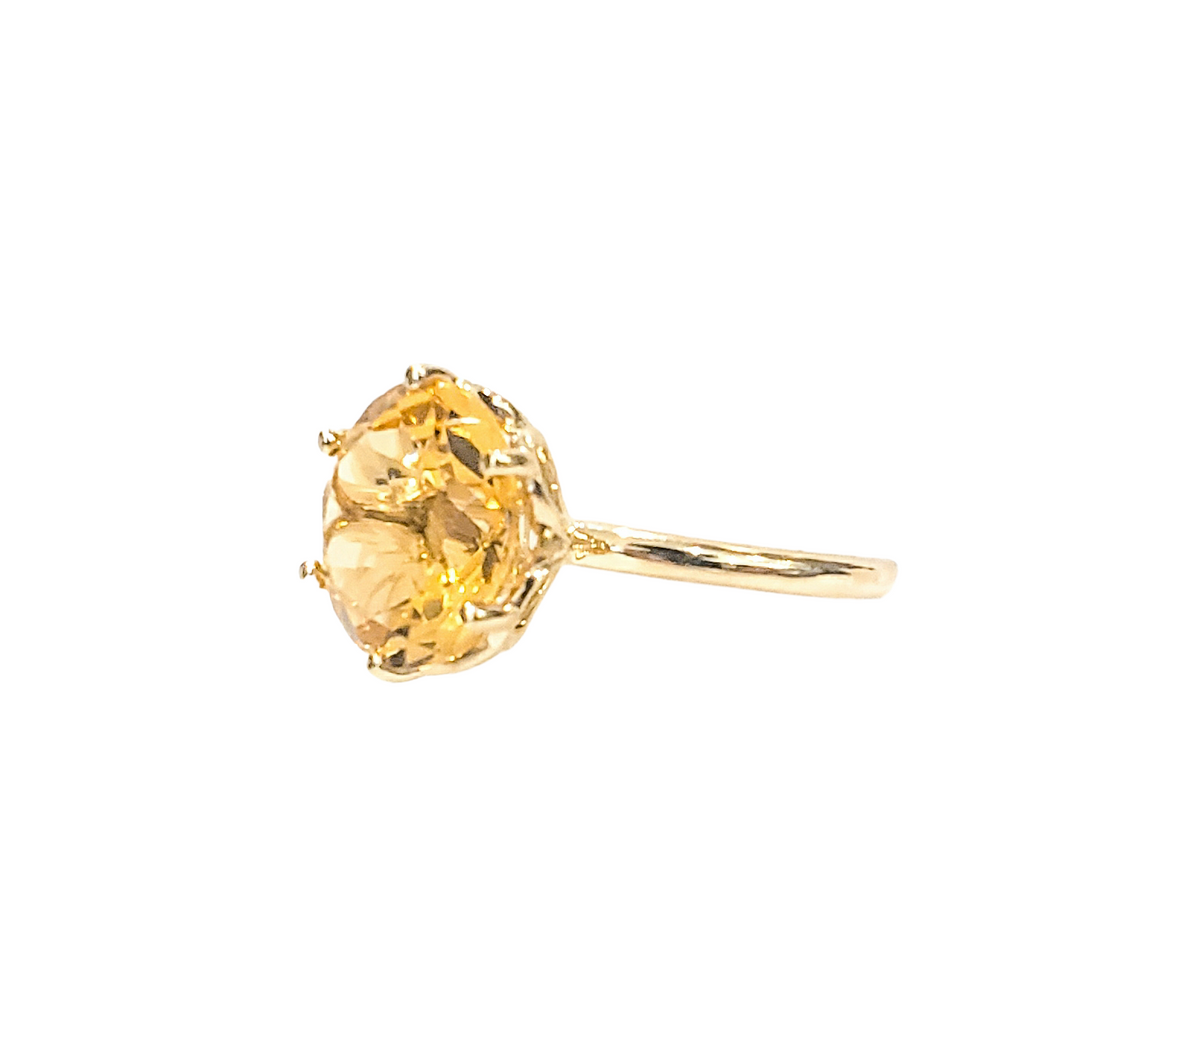 10K Yellow Gold 12mm Citrine Ring - Size 7